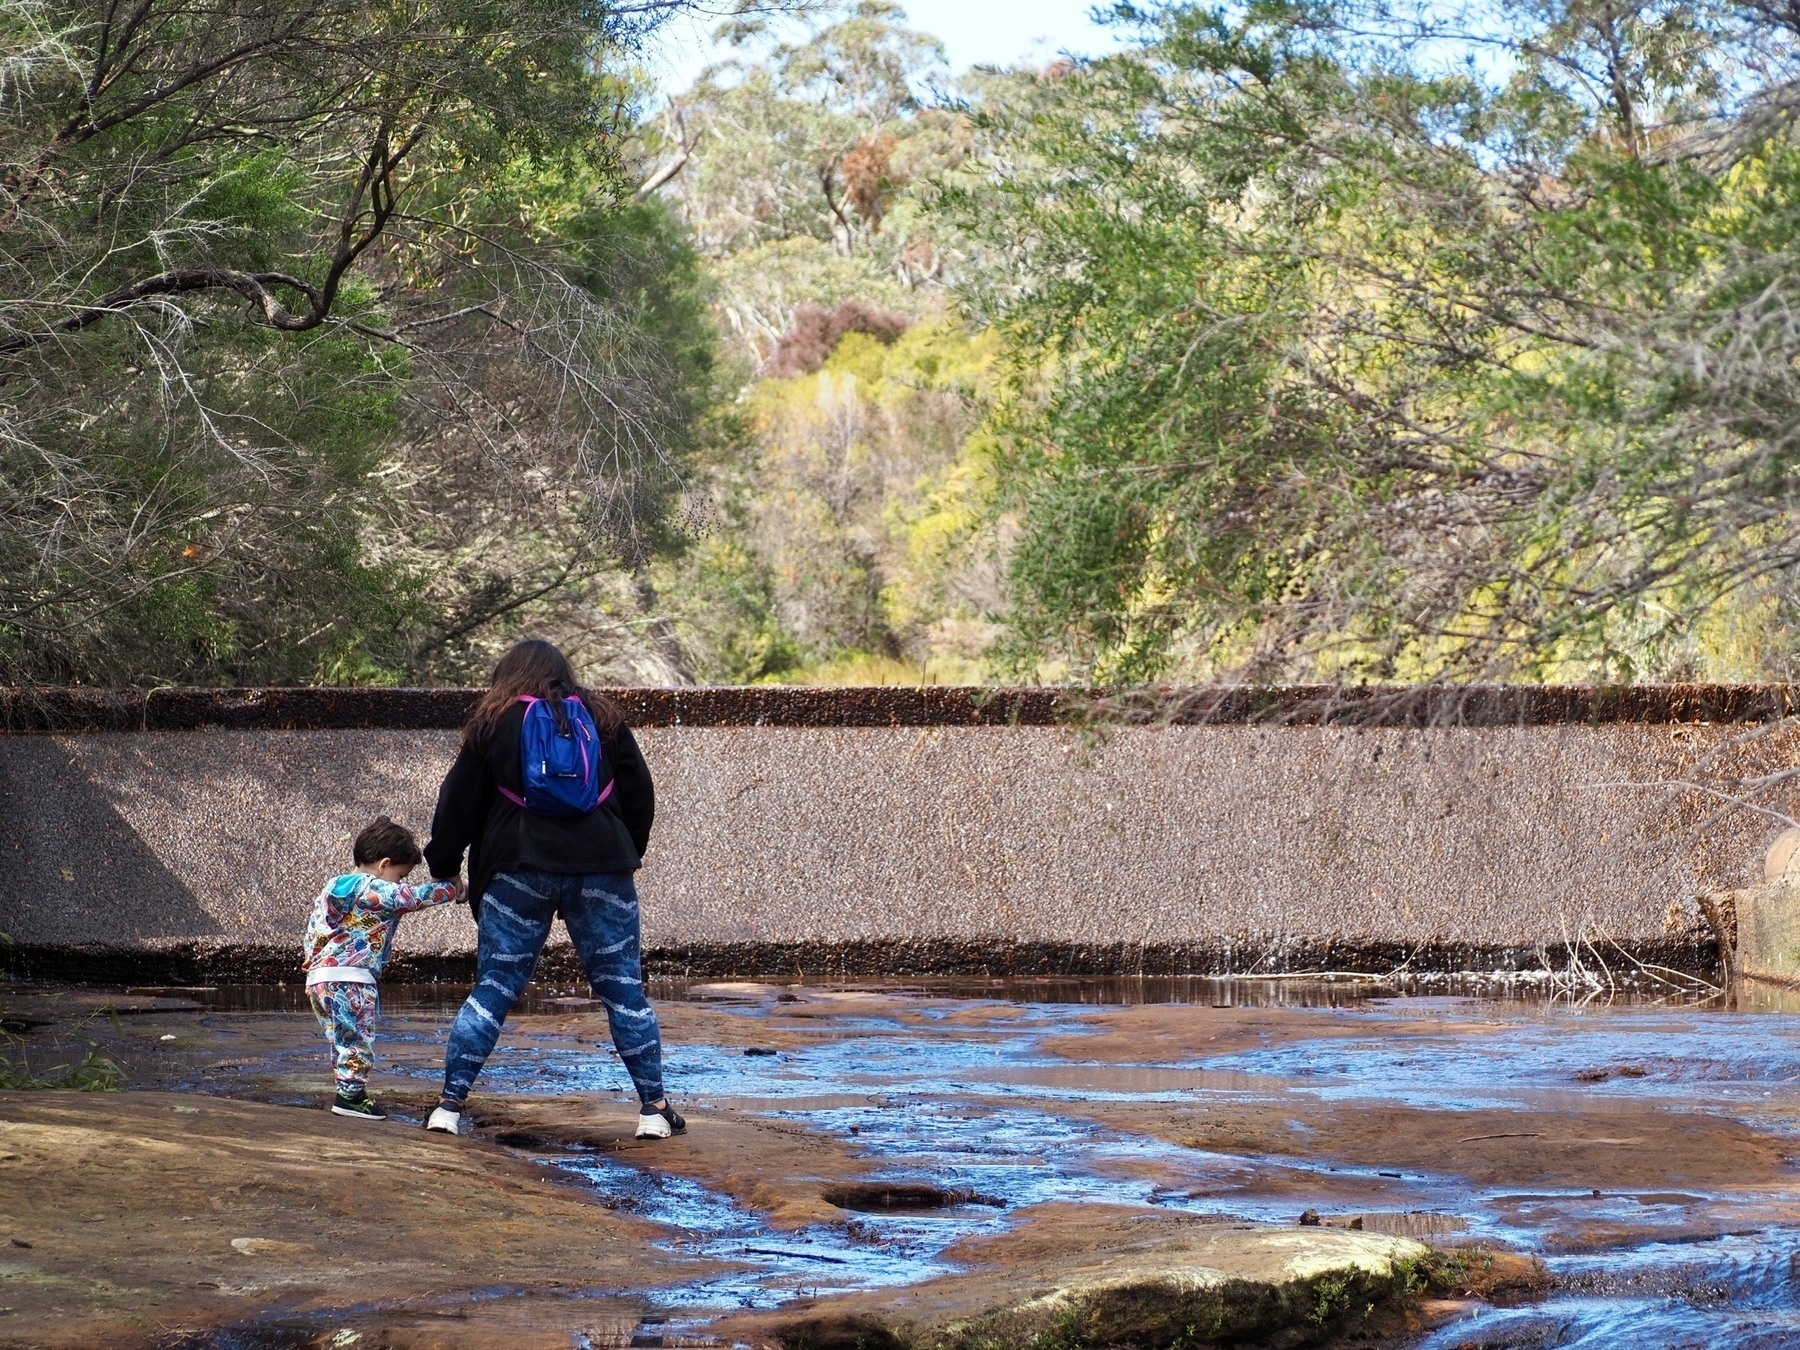 A mother and son navigate rock pools in a national park.